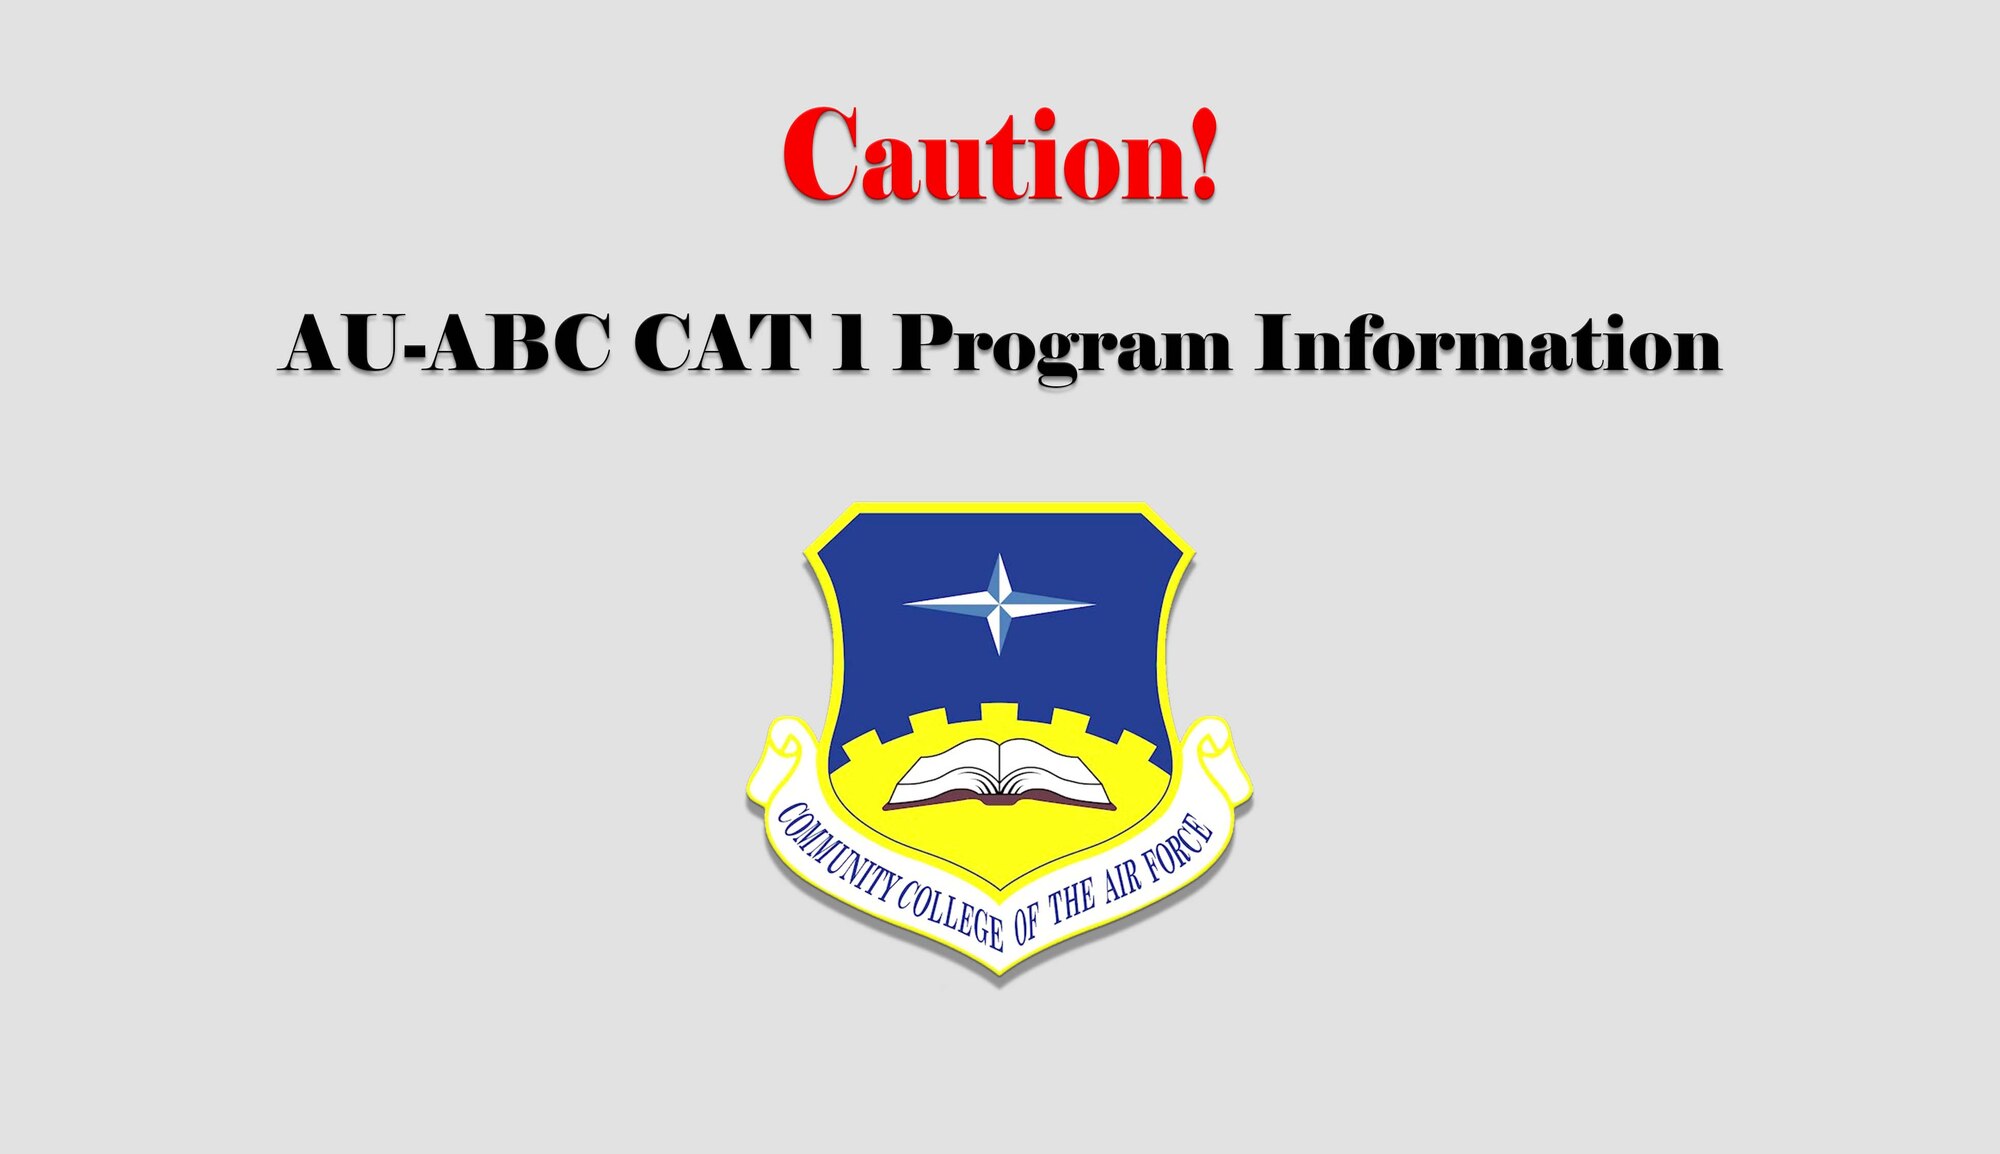 Students interested in an AU-ABC CAT I program should complete their CCAF AAS degree prior to enrolling in an AU-ABC CAT I program.